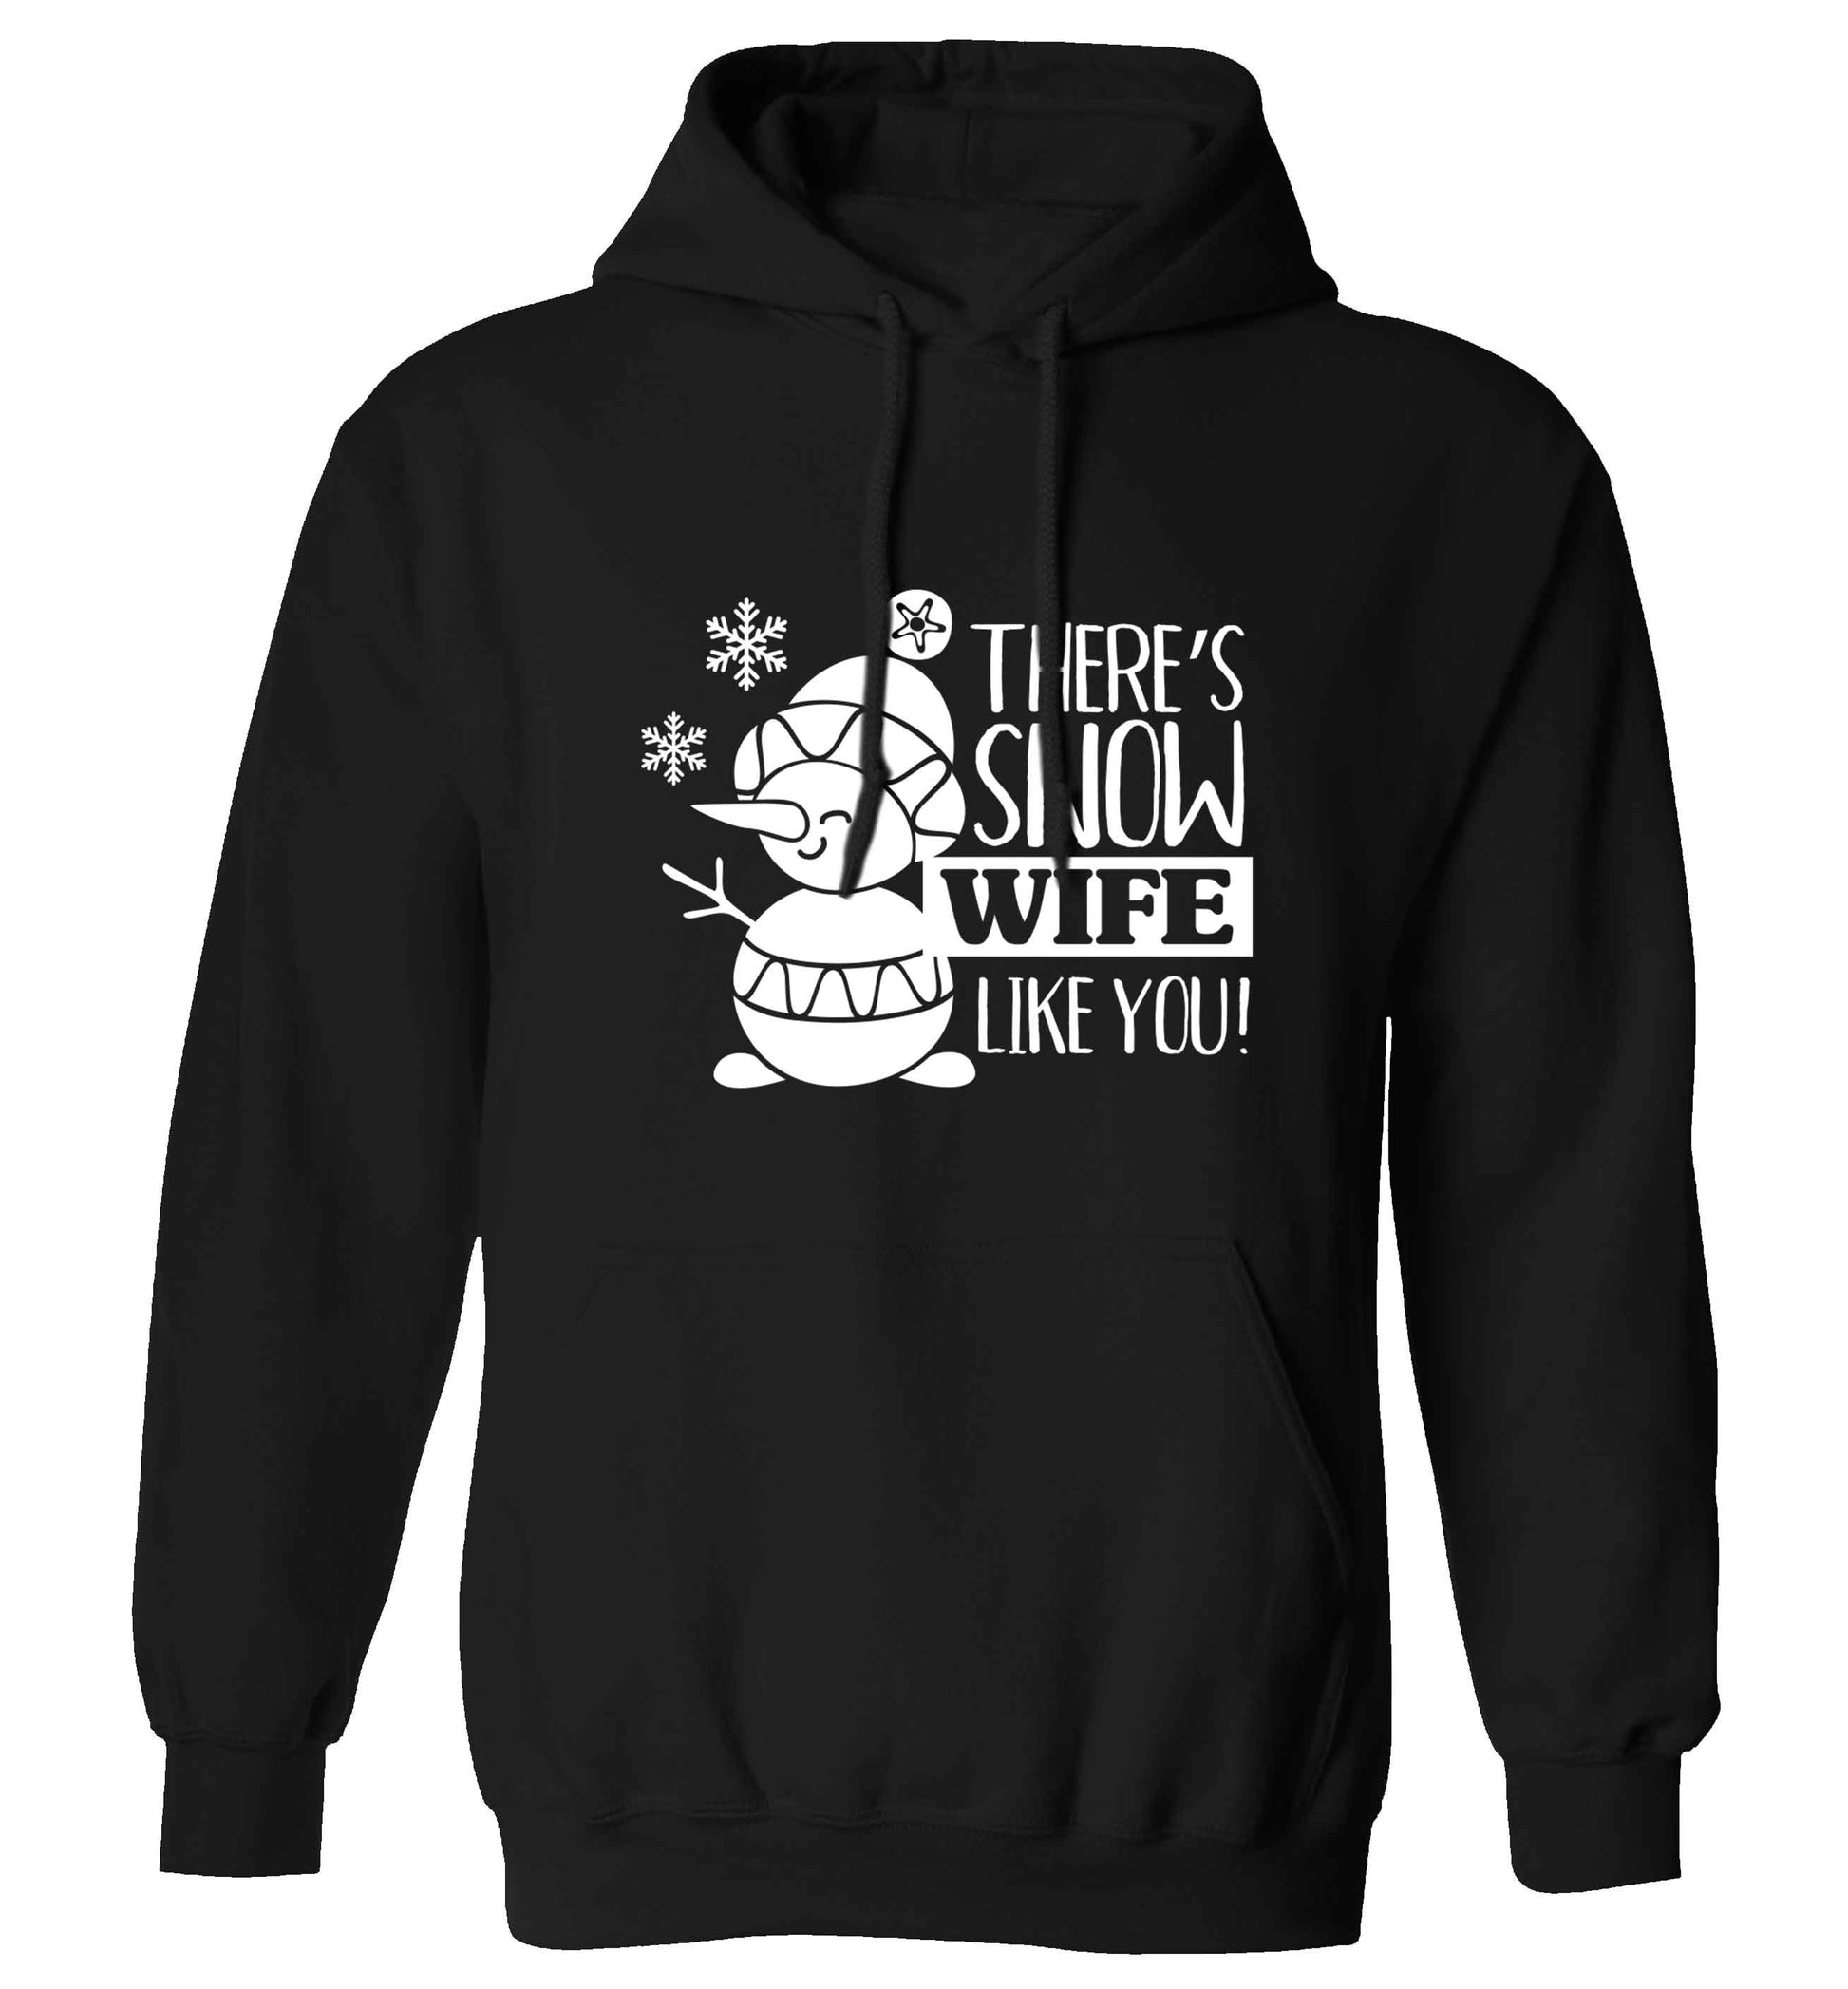 There's snow wife like you adults unisex black hoodie 2XL